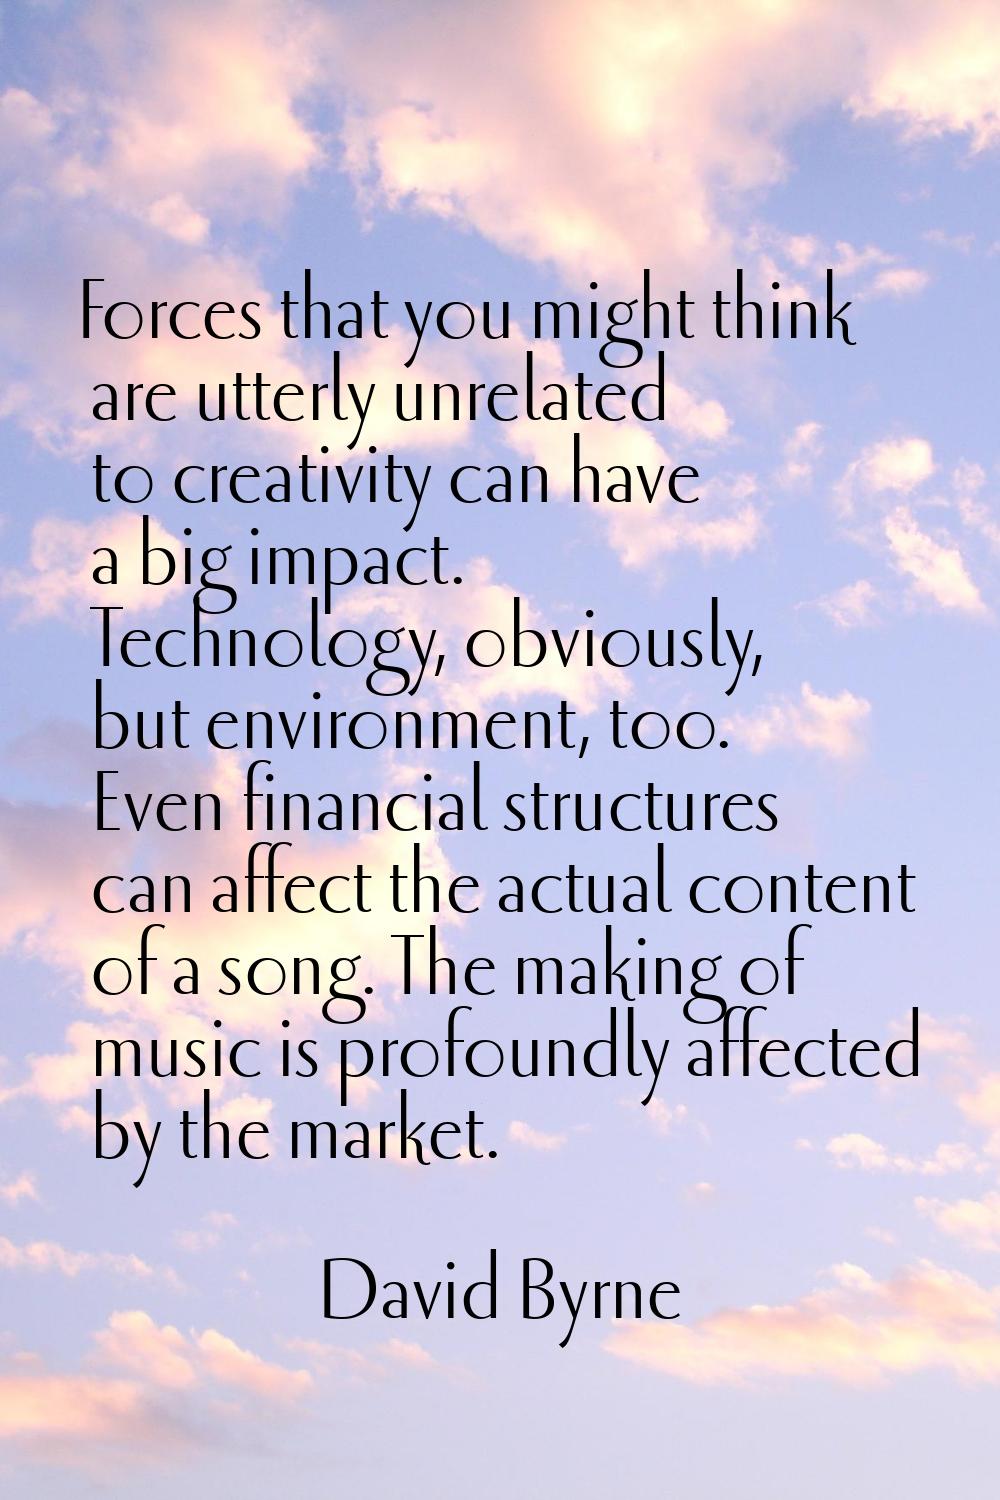 Forces that you might think are utterly unrelated to creativity can have a big impact. Technology, 